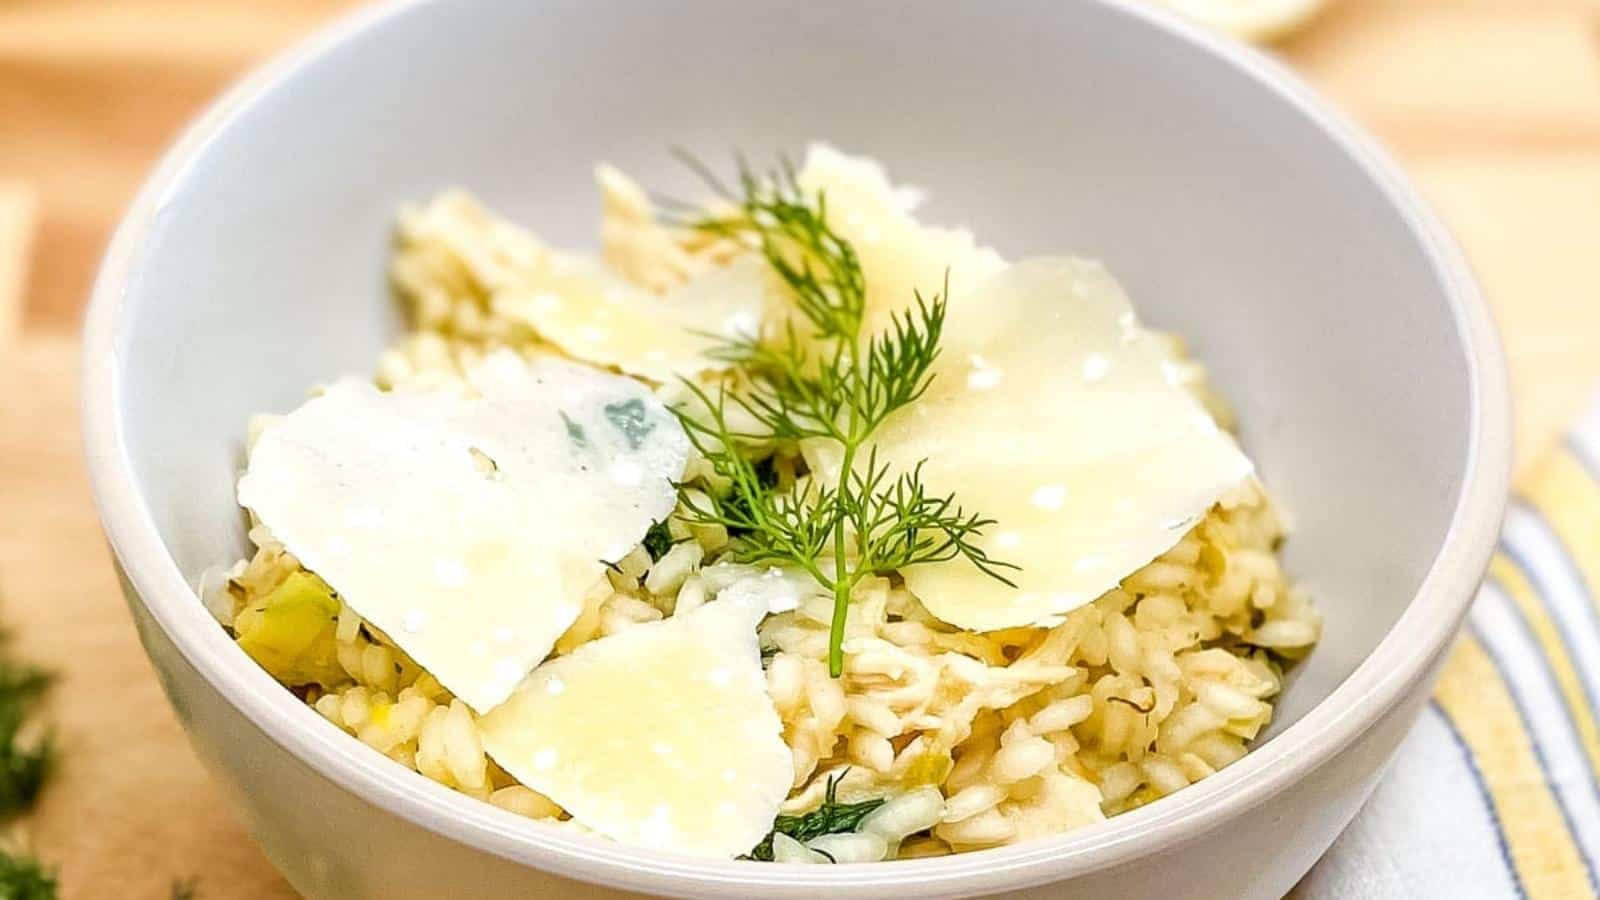 Chicken and leek risotto topped with parmesan and fresh dill in a white bowl.